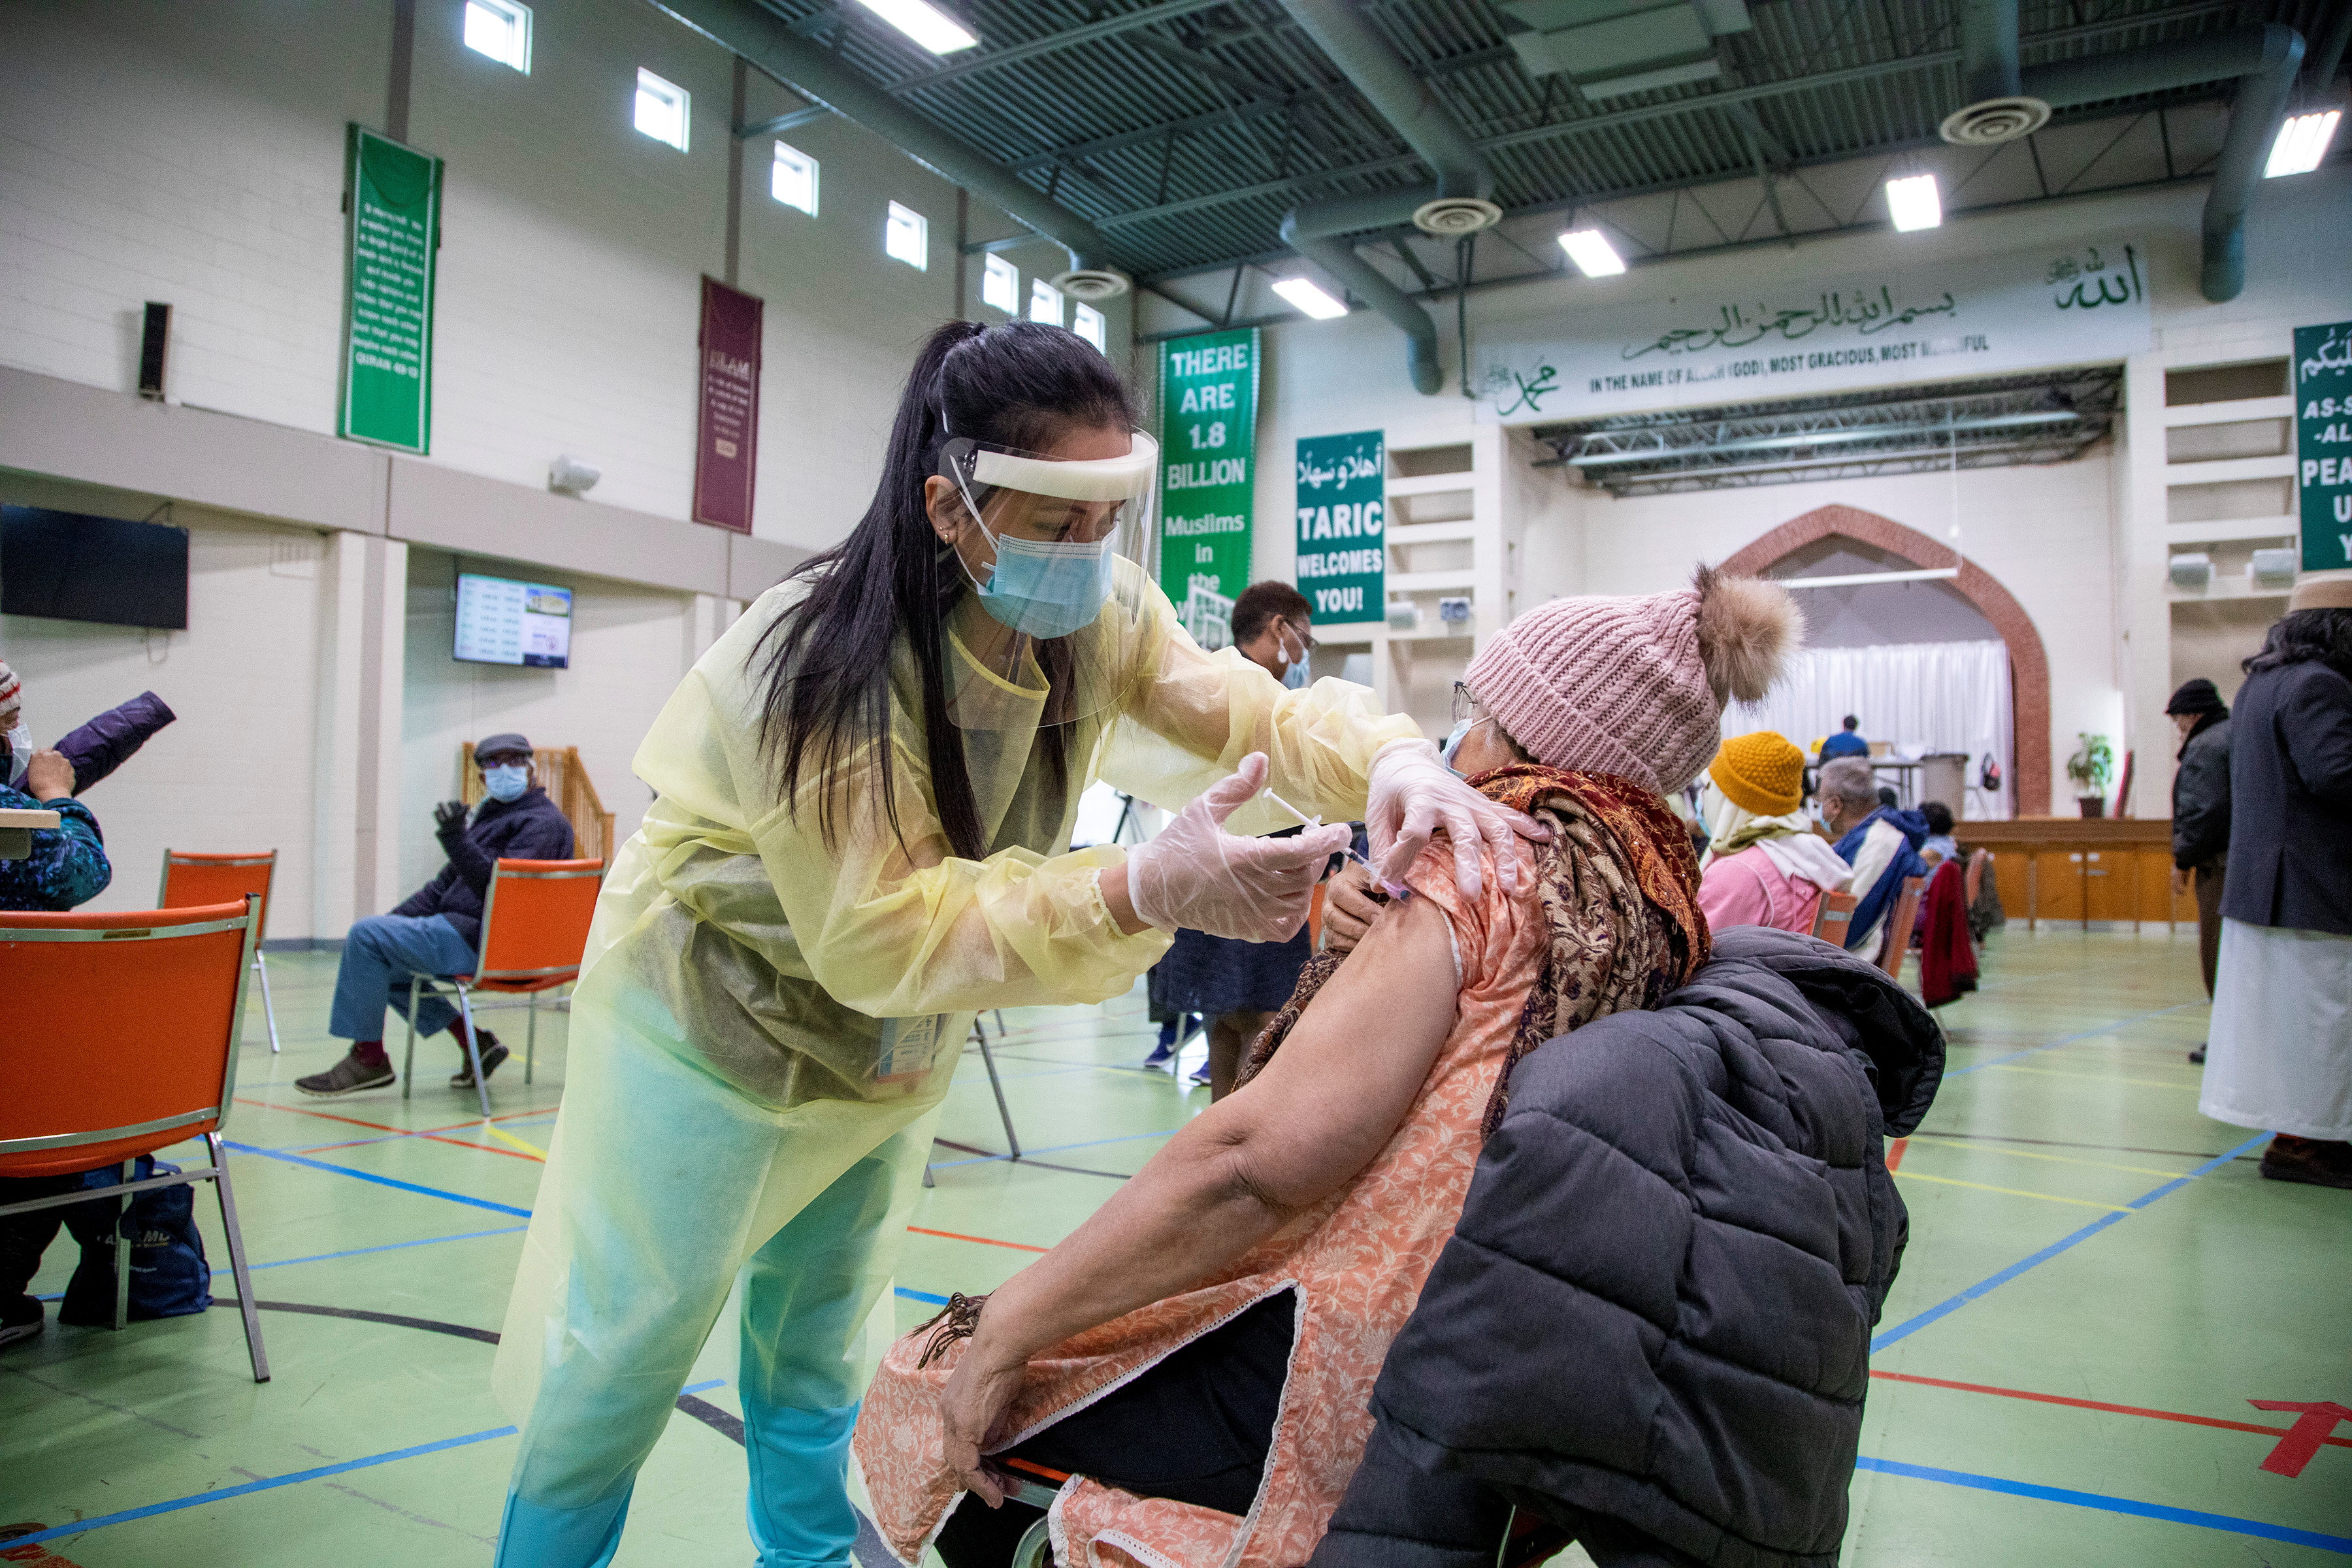 Nurses from Humber River Hospital's mobile vaccine clinic administer the Moderna COVID-19 vaccine at Toronto and Region Islamic Congregation Centre as part of the coronavirus disease (COVID-19) vaccination campaign, in Toronto, Ontario, Canada April 1, 2021. REUTERS/Carlos Osorio